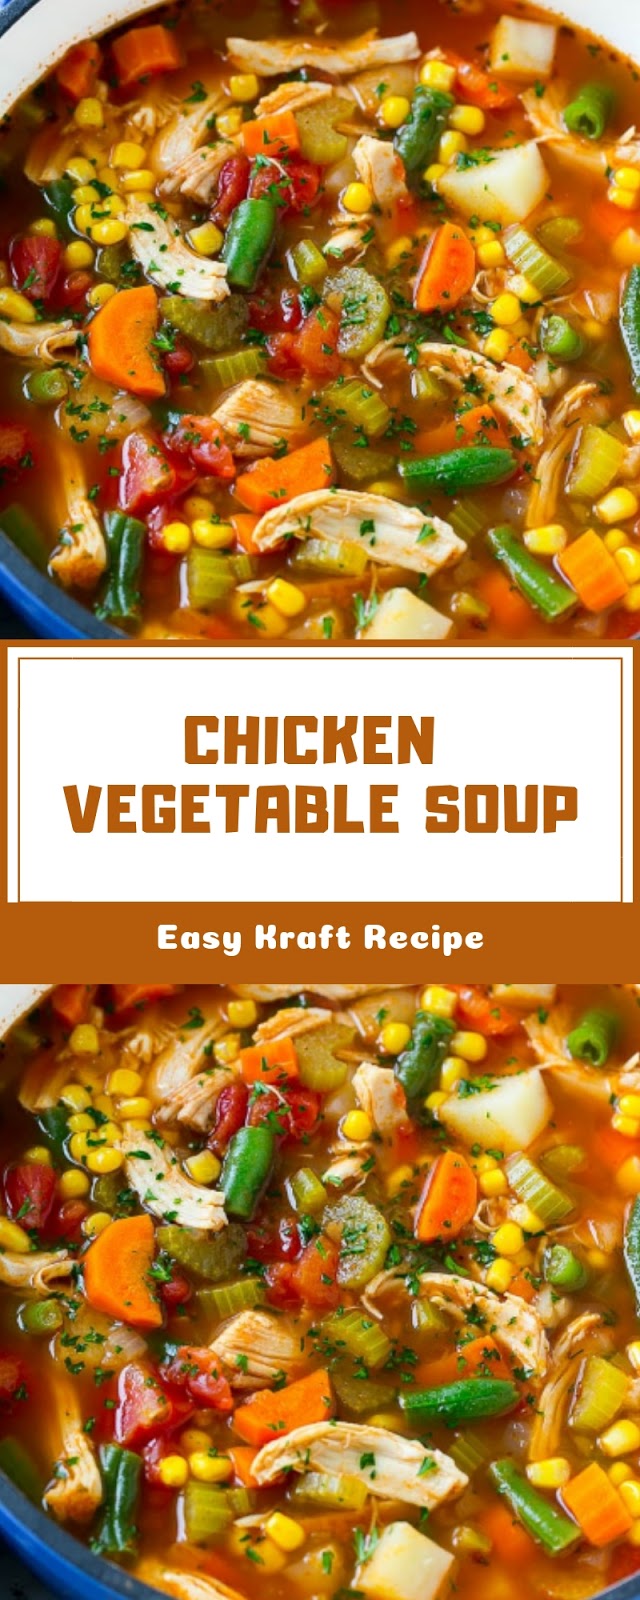 CHICKEN VEGETABLE SOUP